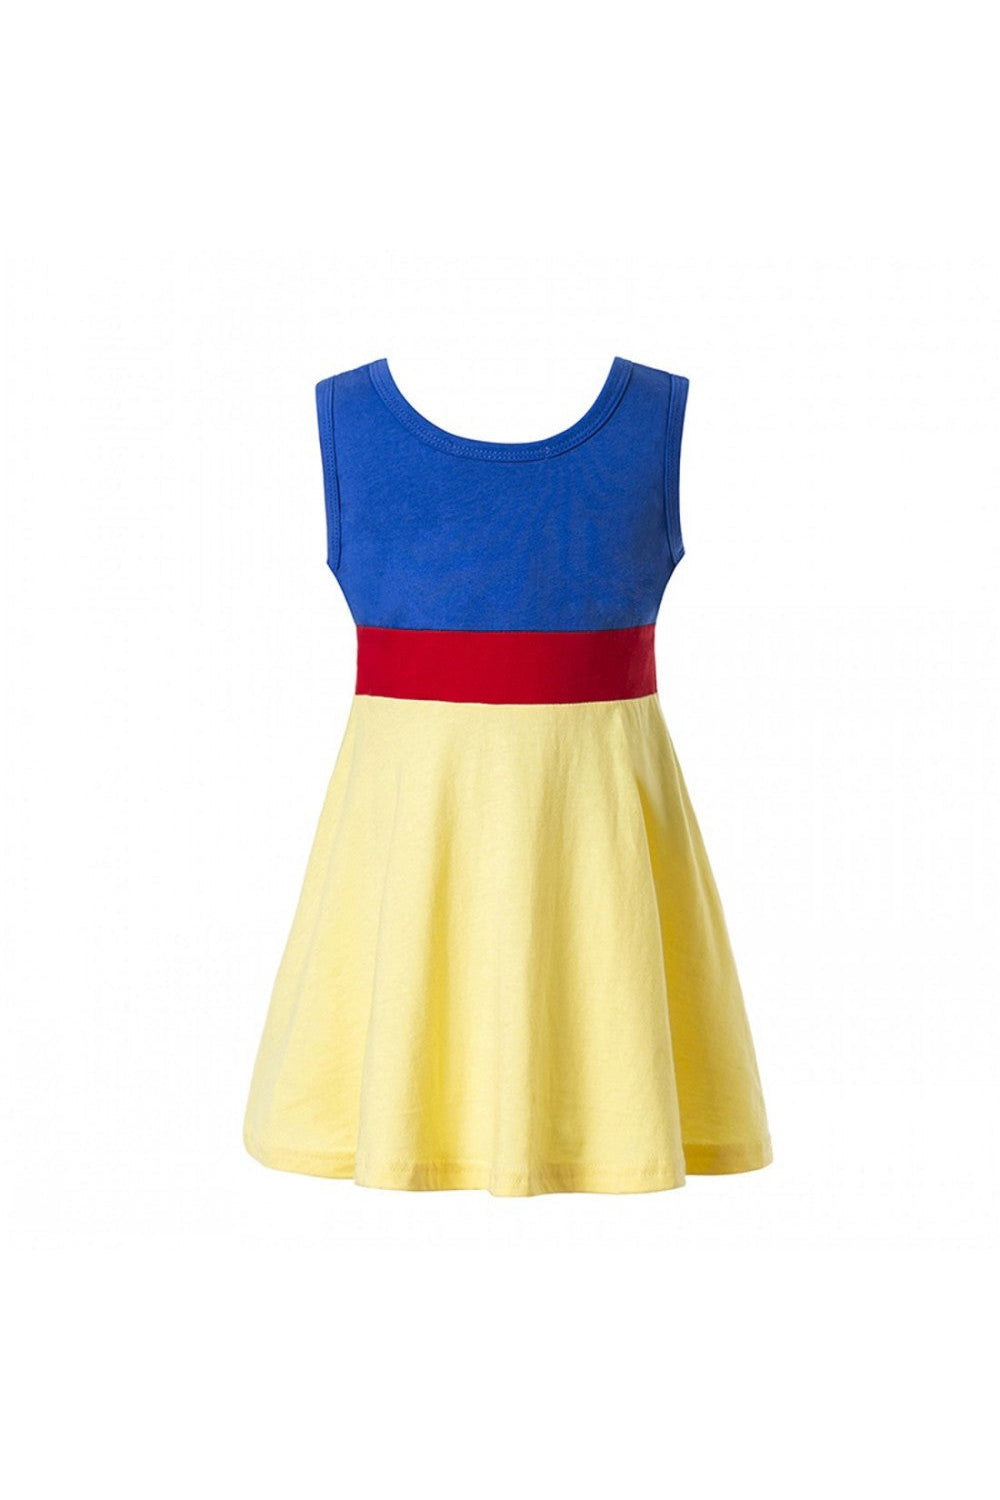 Princess inspired Fancy dresses - The Snow White